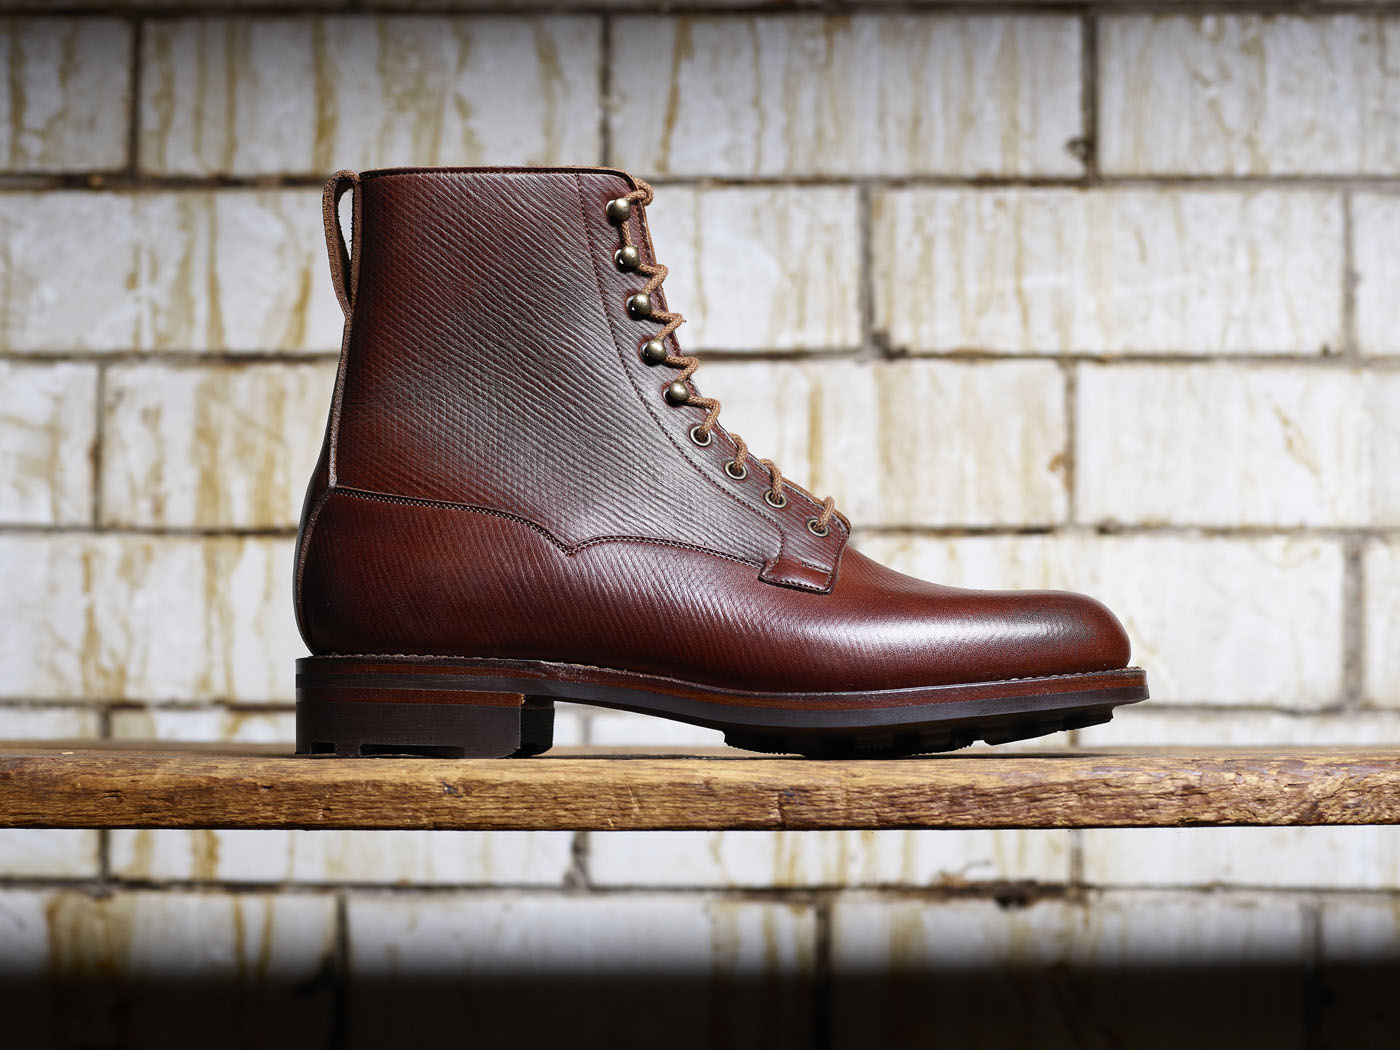 Crockett & Jones uses a specially commissioned leather for popular textured versions of the brand’s range, including the Radnor boot